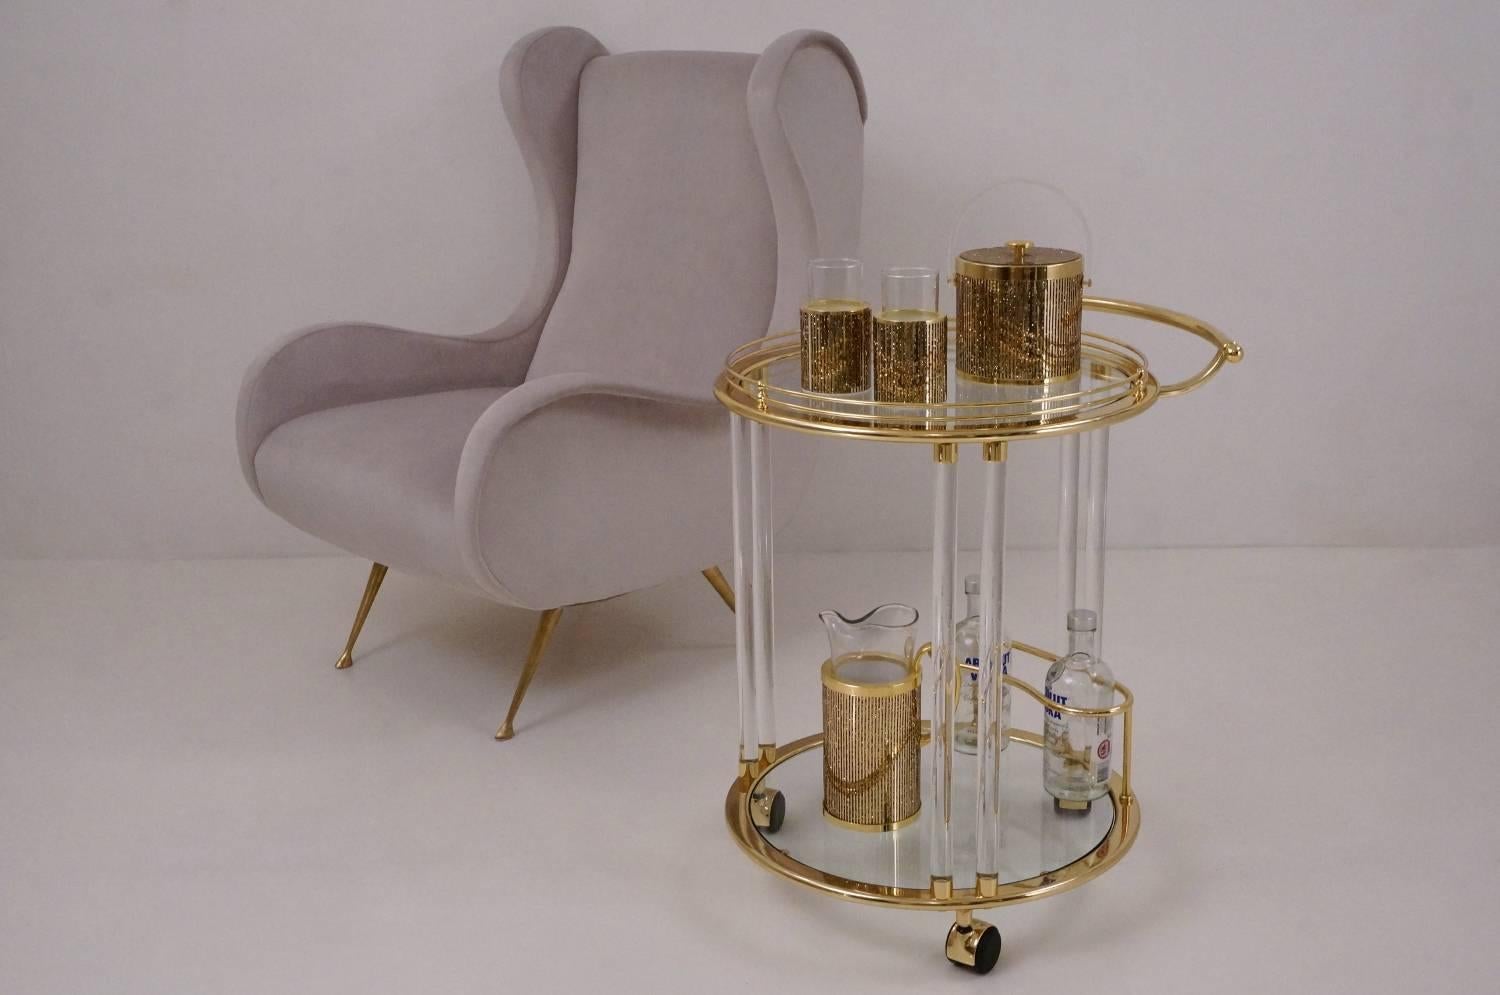 Lucite, glass and brass bar cart or trolley manufactured by Orsenigo in Milan, Italy, circa 1980. Top and bottom round glass shelves fit into brass frames. Each shelf is suspended by double lucite columns. Brass push handleon top shelf and brass